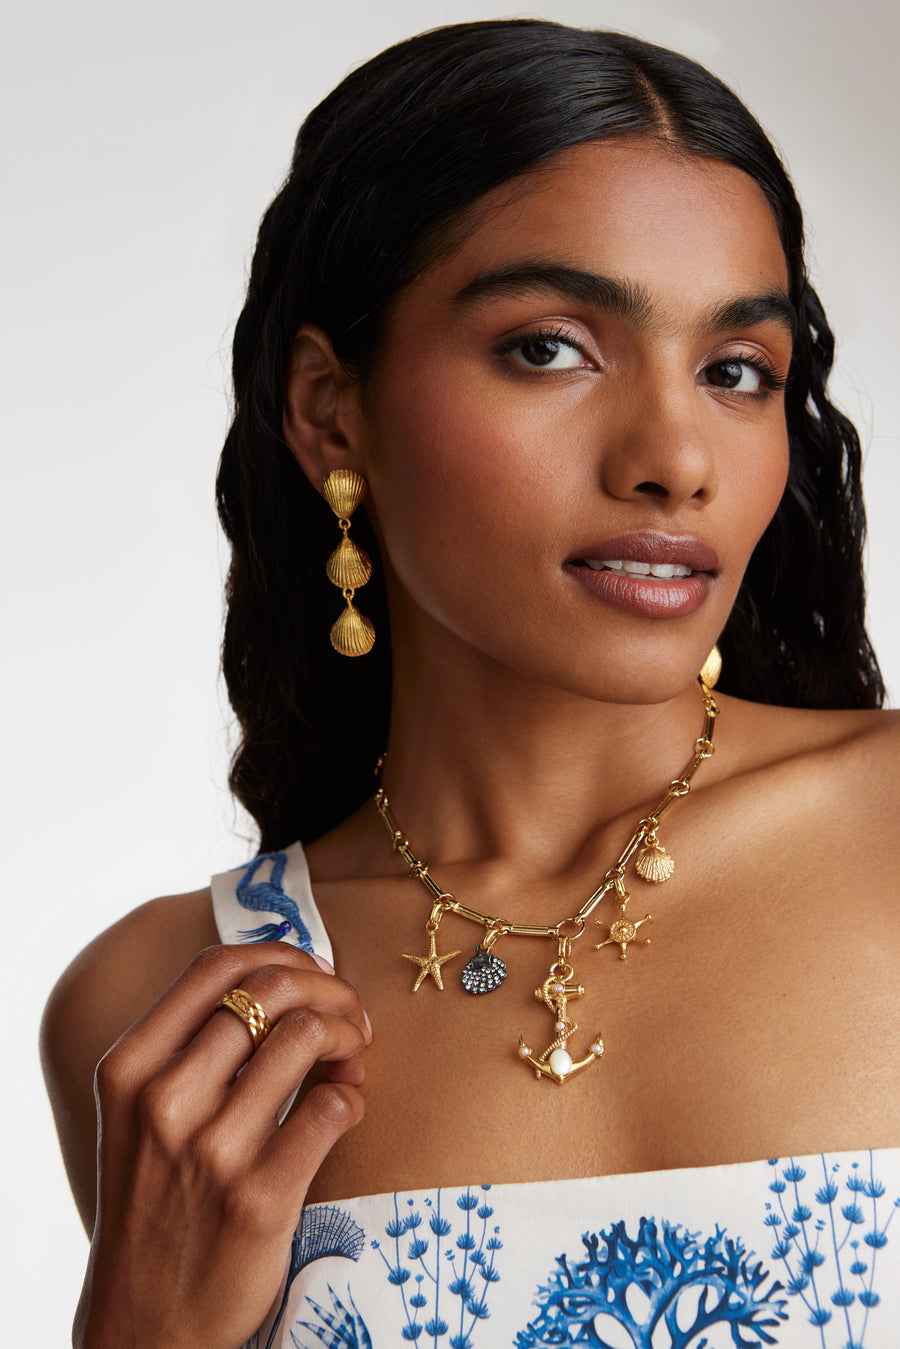 Model shot wearing soru jewellery Crystal Embellished Silver Shell Charm with other nautical charms attached to a charm chain and wearings shell drop earrings with a gold ring